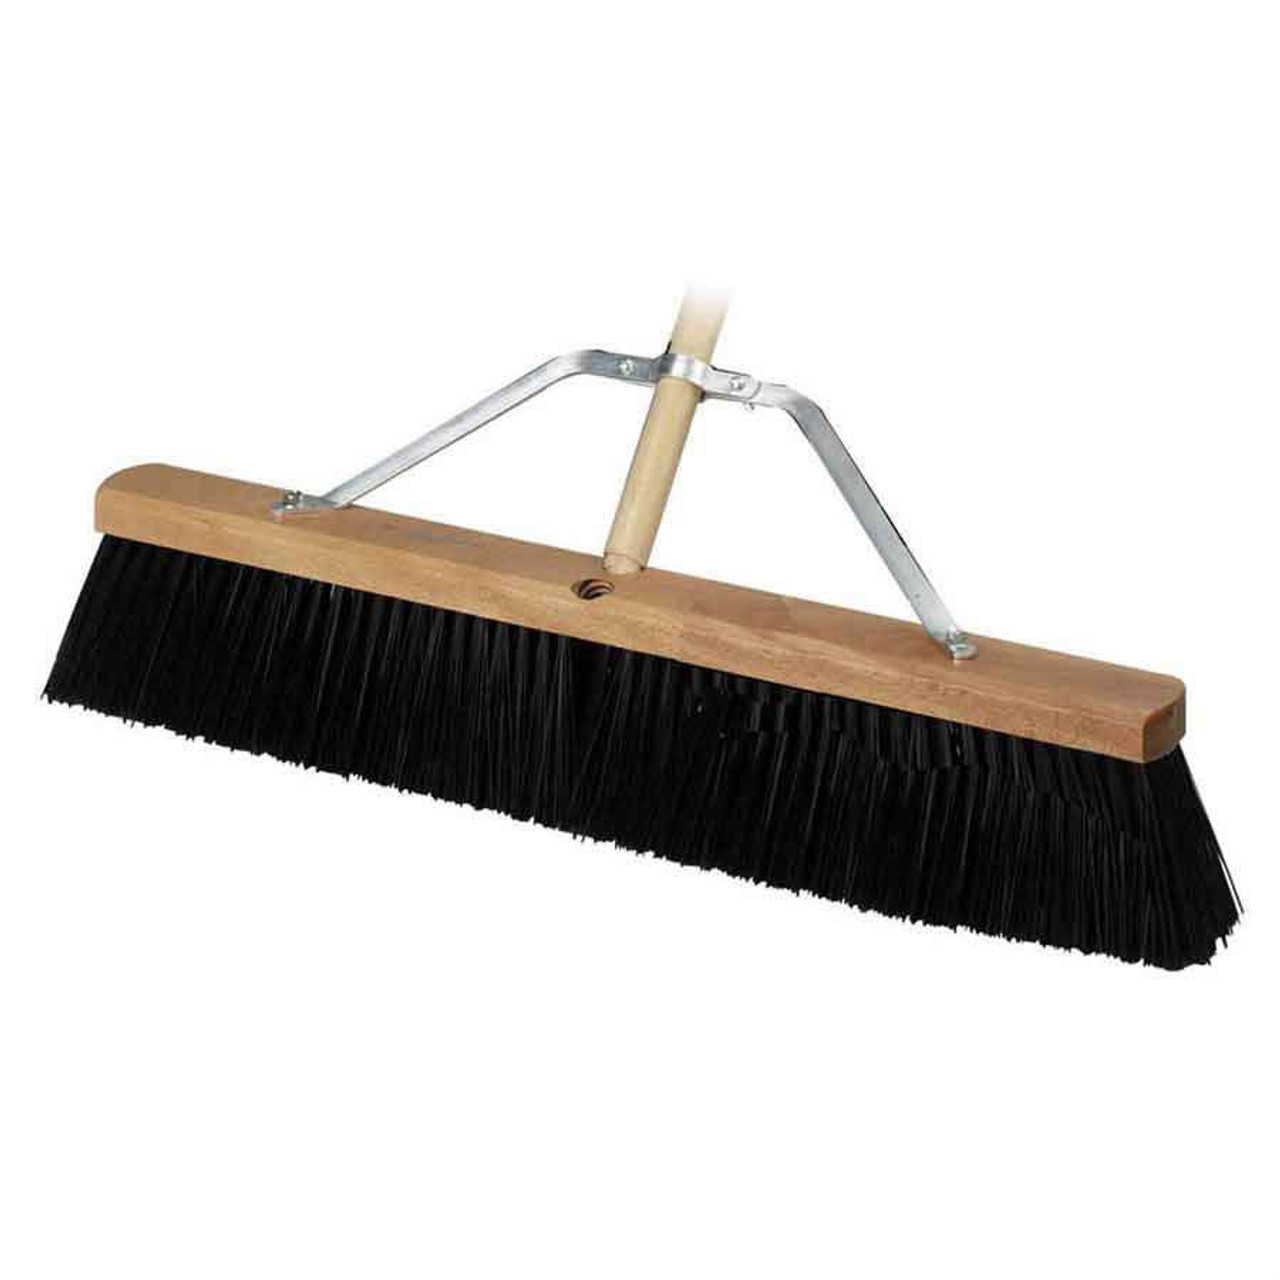 https://cdn11.bigcommerce.com/s-zgzol/images/stencil/1280x1280/products/26707/162087/bon-tool-12-300-concrete-broom-heavy-duty-24-with-5-wood-handle__29900.1675714977.jpg?c=2